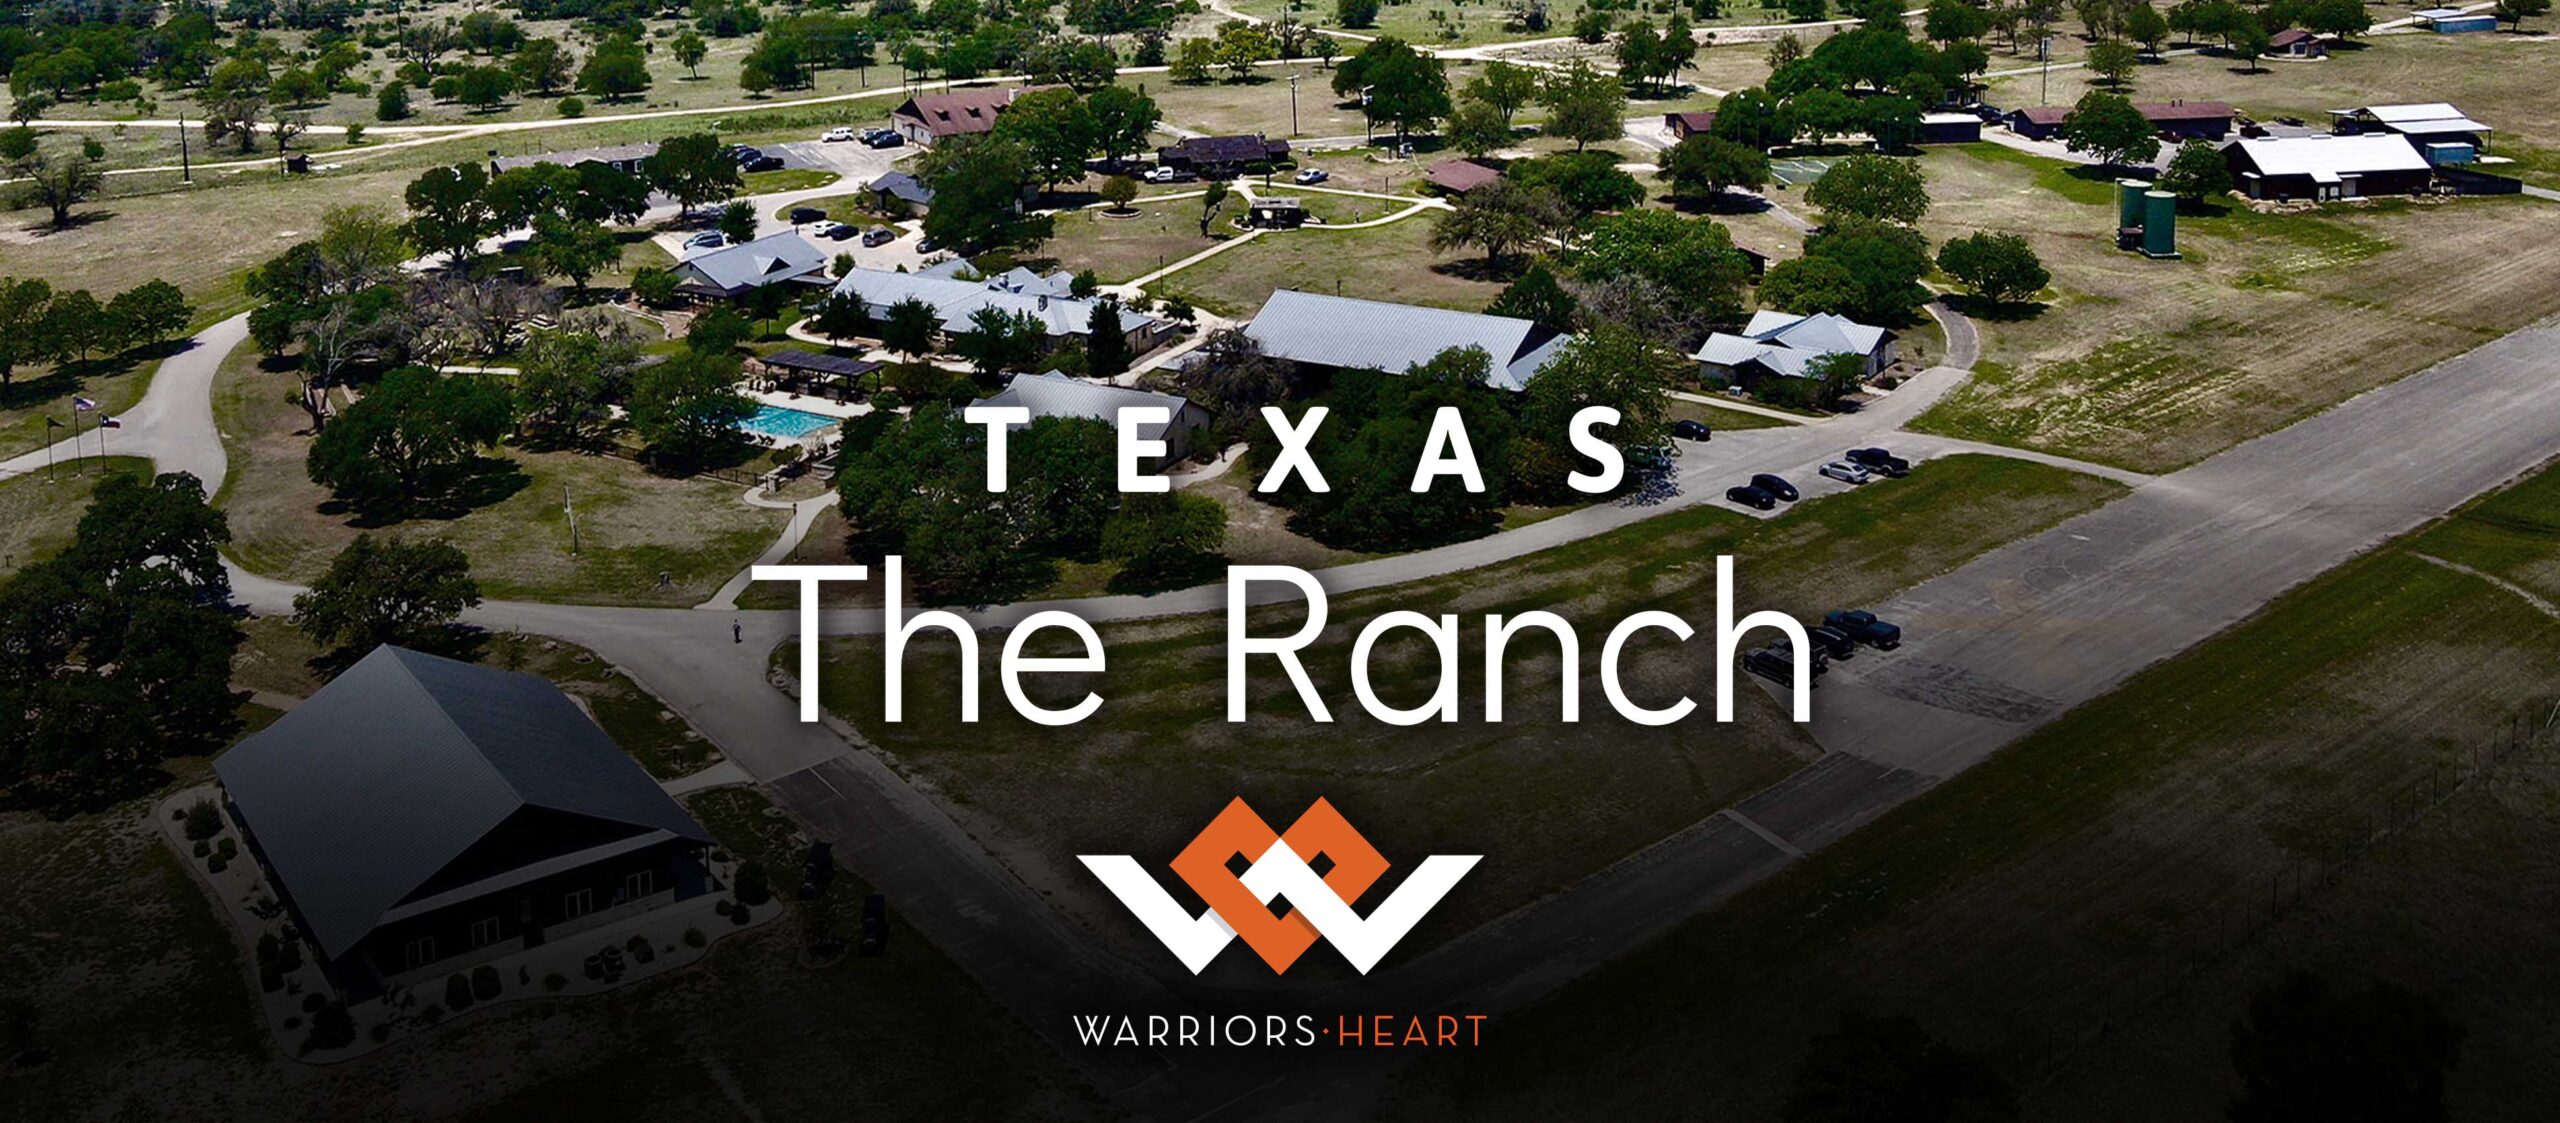 Warriors Heart in Bandera, Texas - The Ranch - Warriors Heart is an addiction and PTSD treatment center for active military, veterans, and first responders. Contact us today at (844) 448-2567.